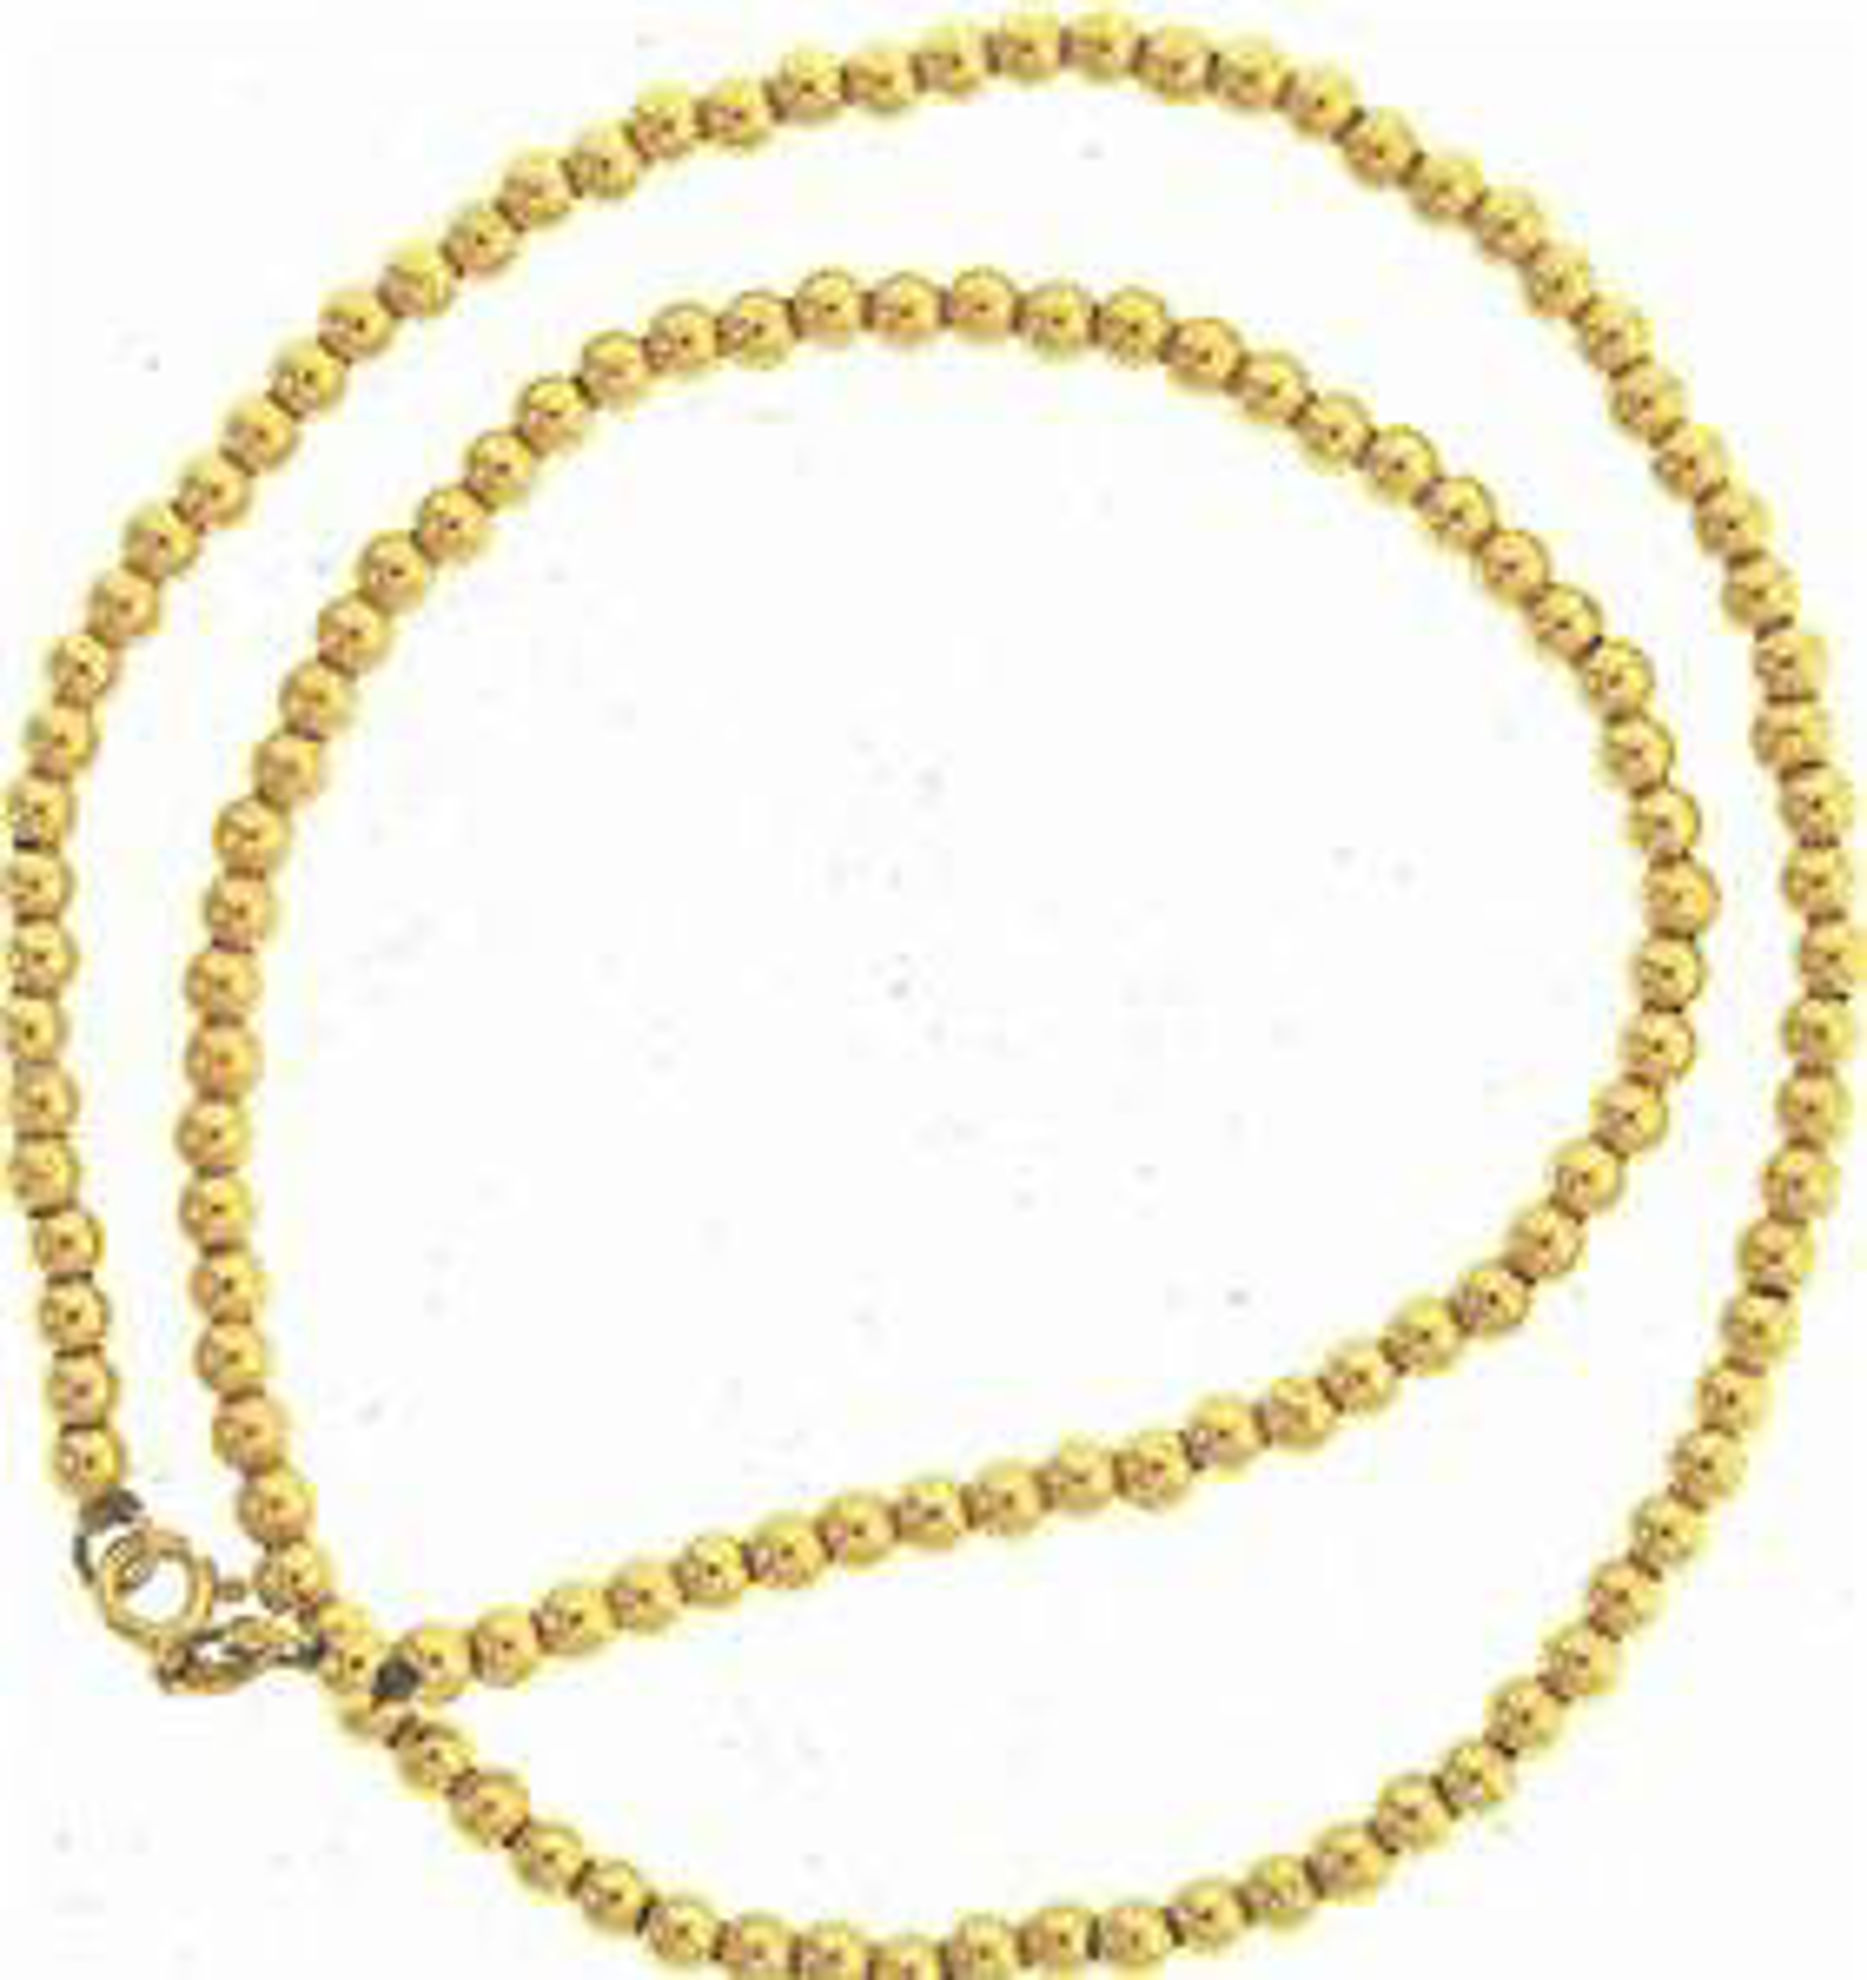 Picture of Chains 14kt-1.9 DWT, 3.0 Grams